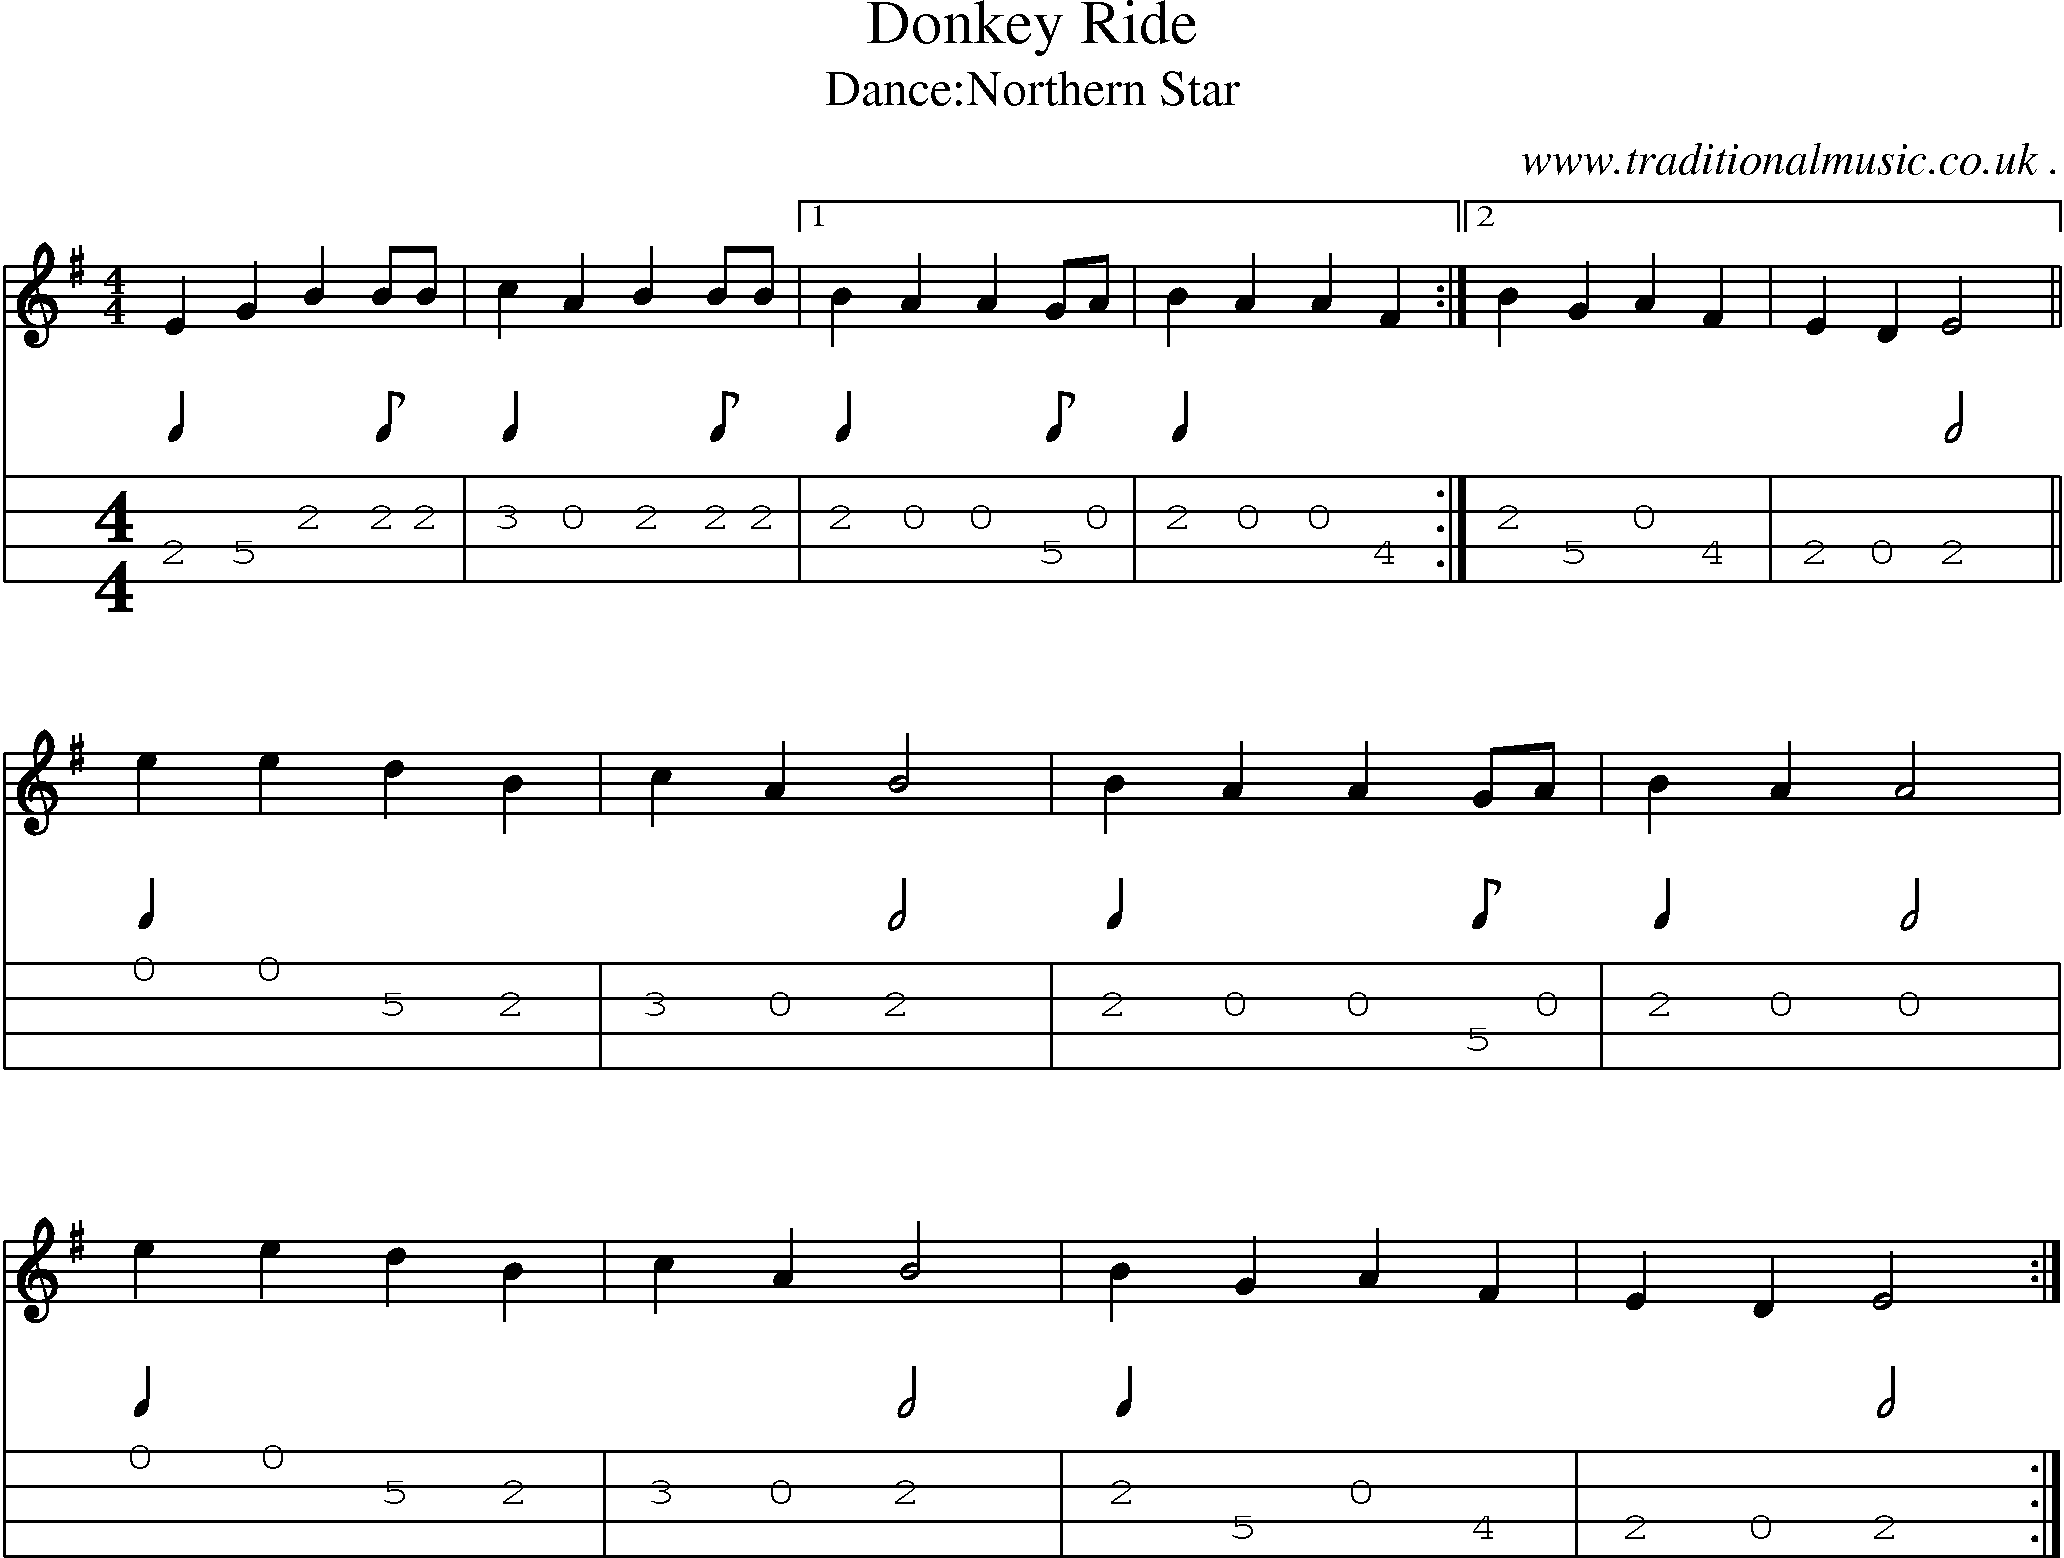 Sheet-Music and Mandolin Tabs for Donkey Ride